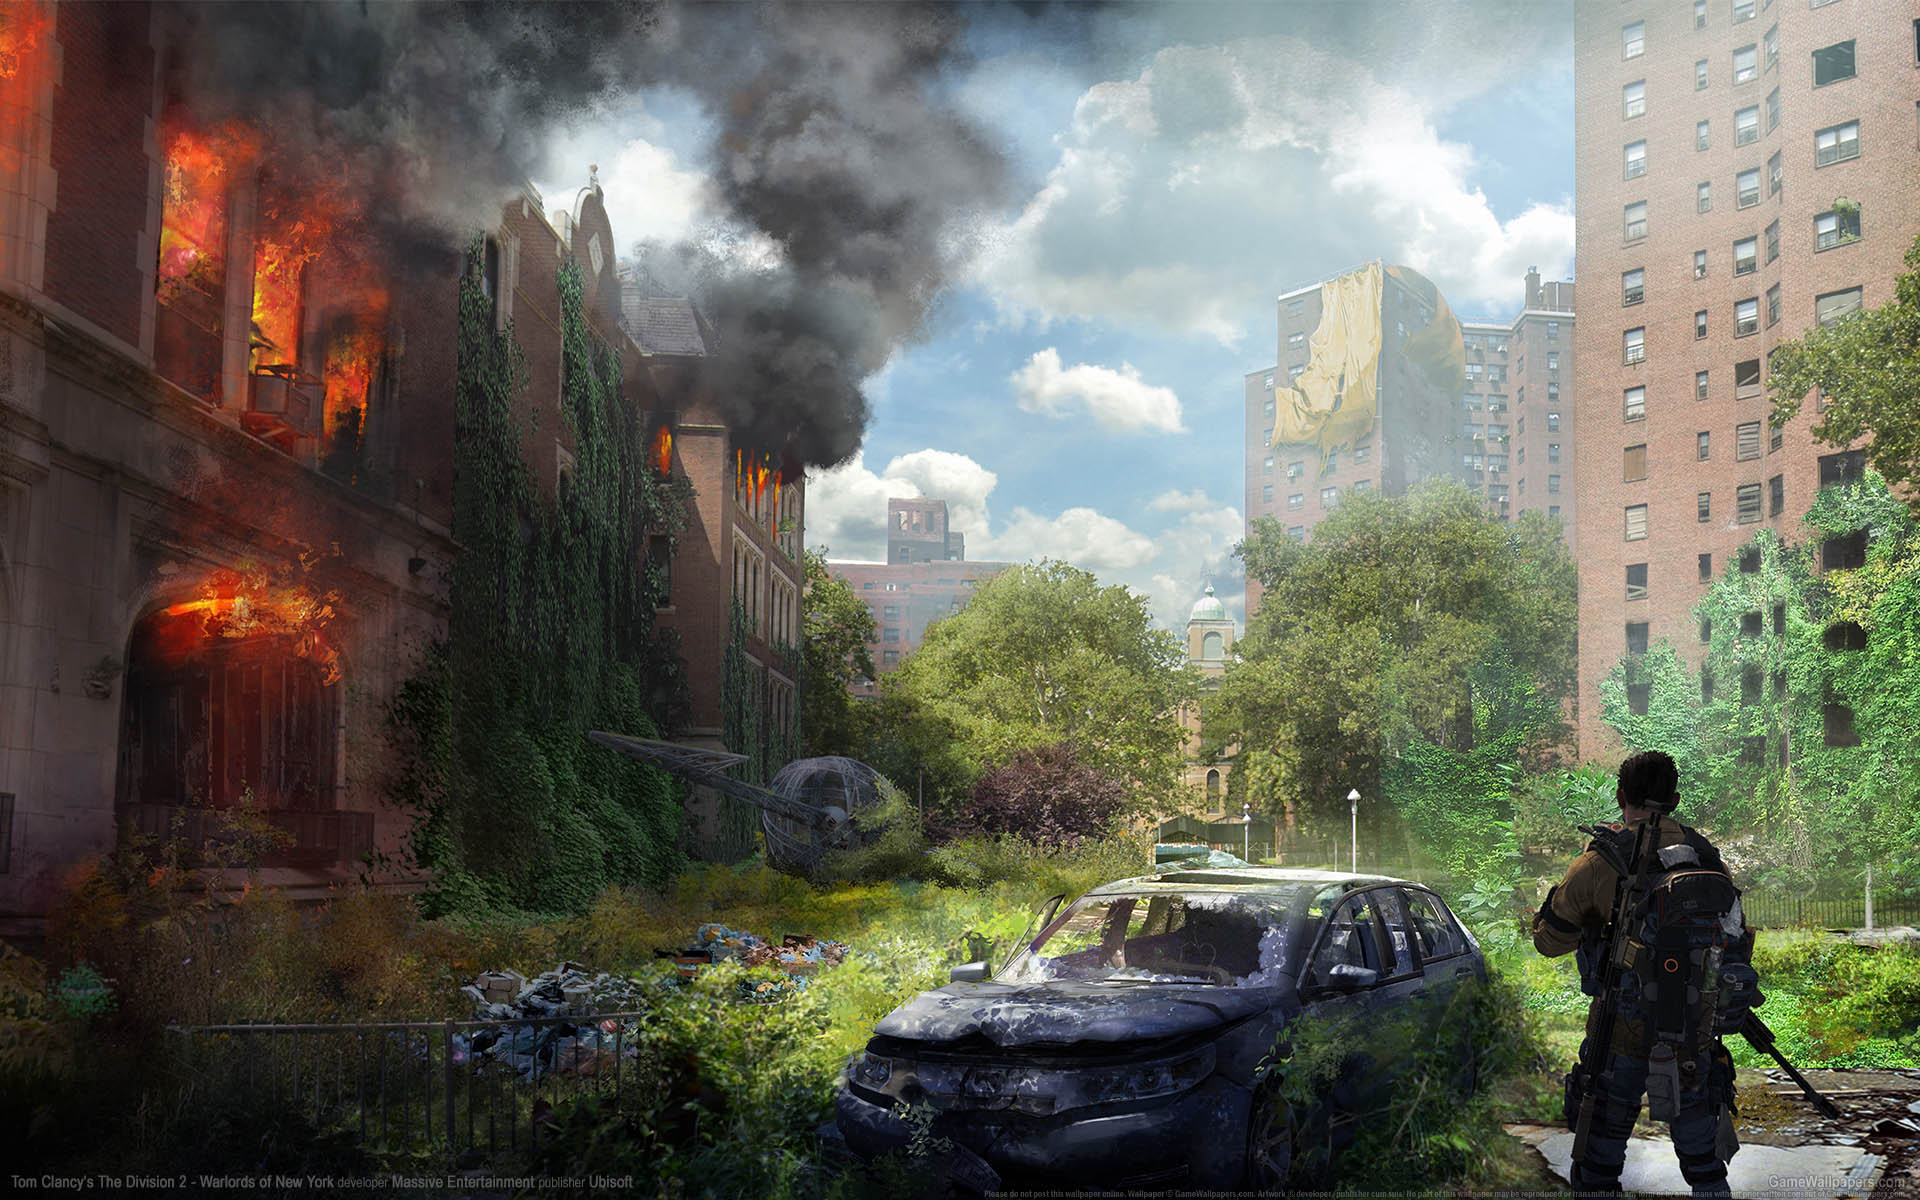 Tom Clancy's The Division 2 - Warlords of New York wallpaper 03 1920x1200